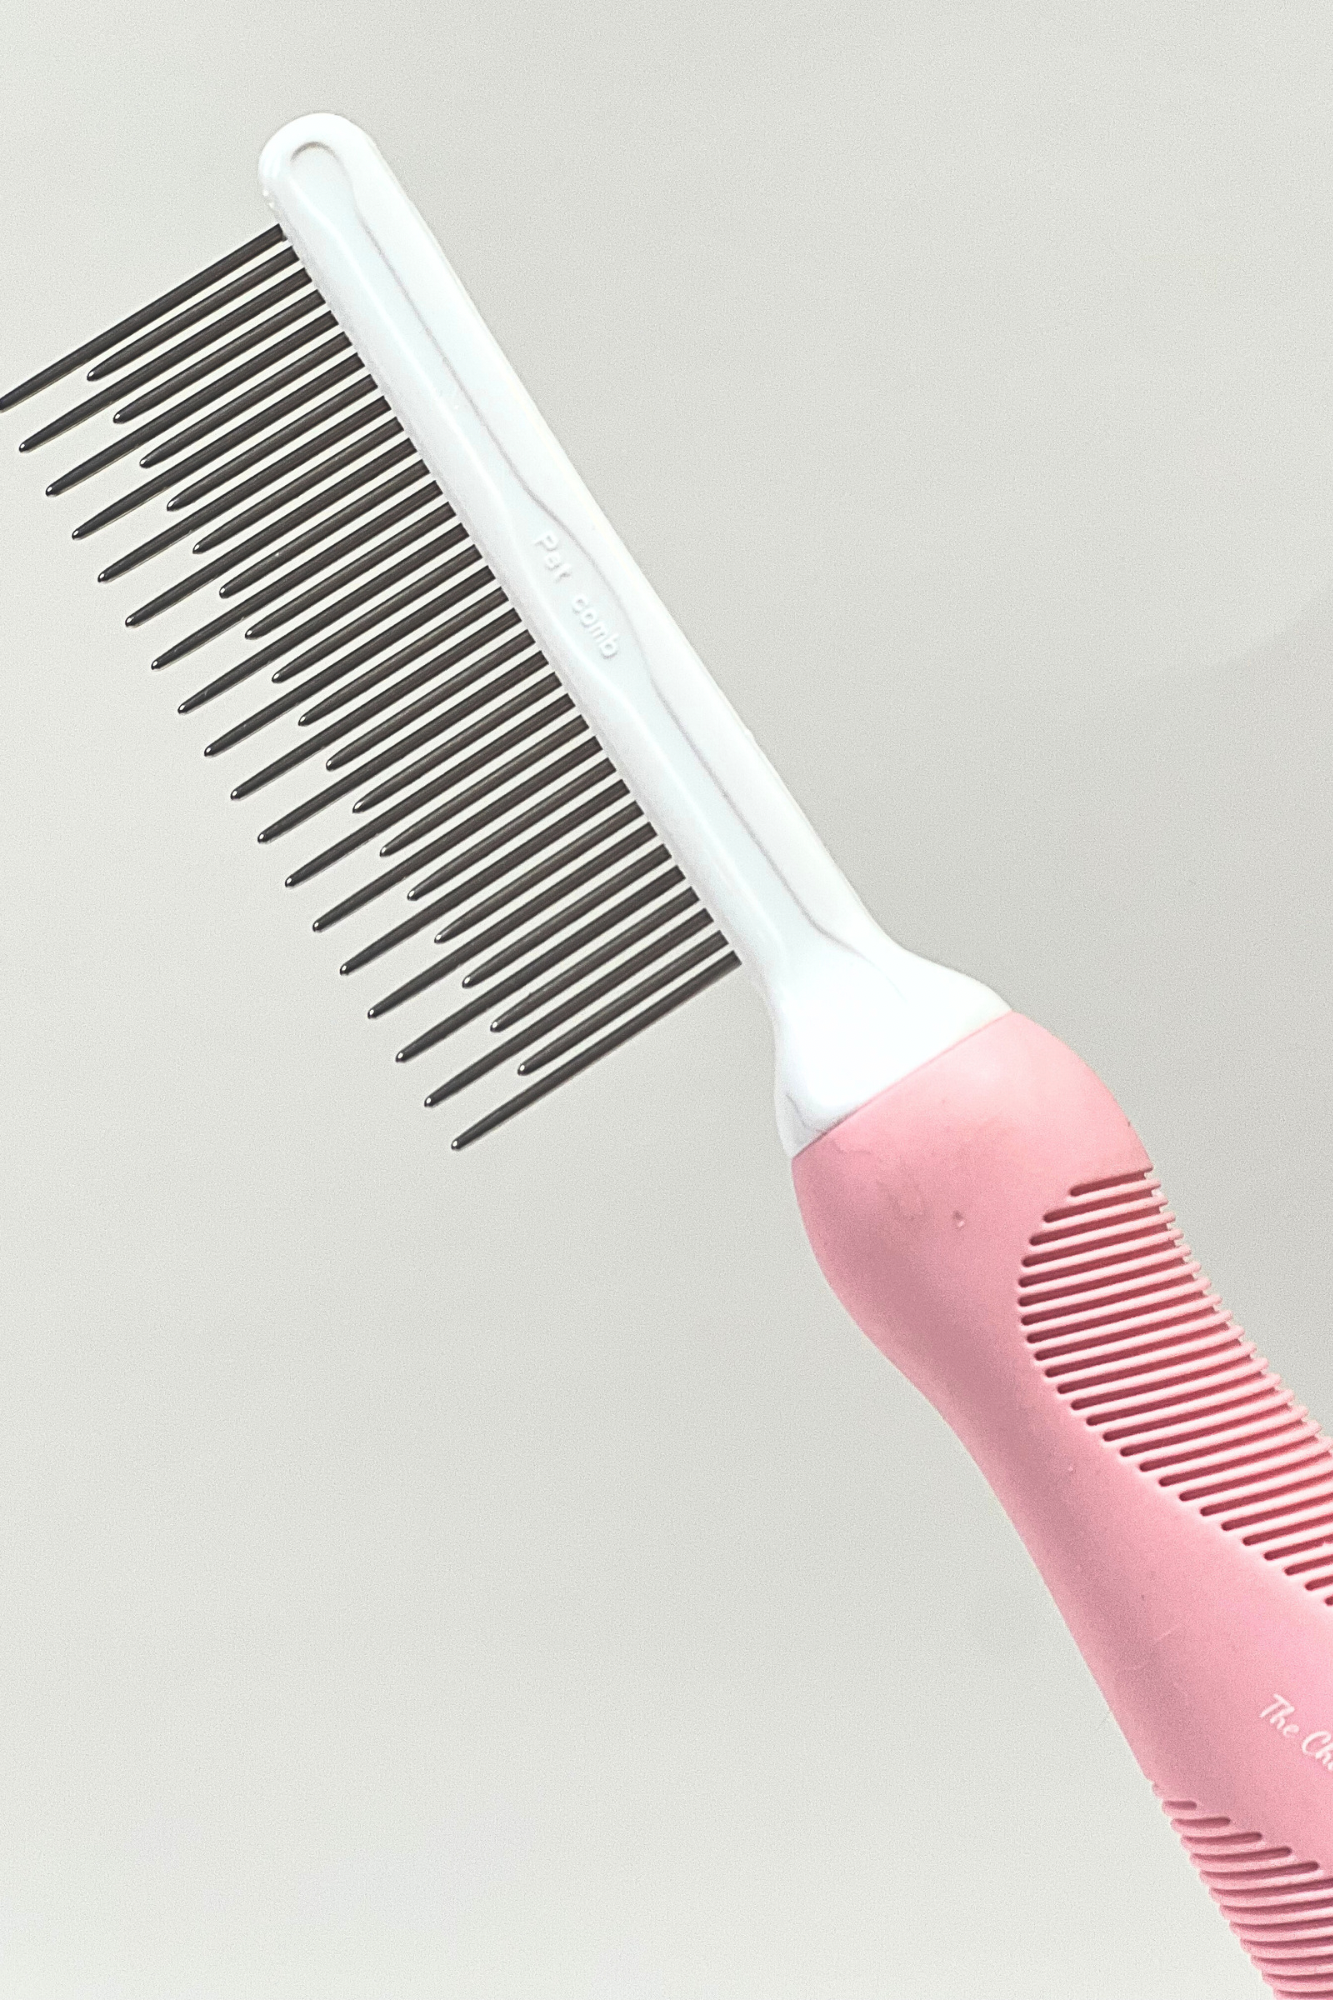 Detangling Pet Comb with Long & Short Stainless Steel Teeth for Removing Matted Fur